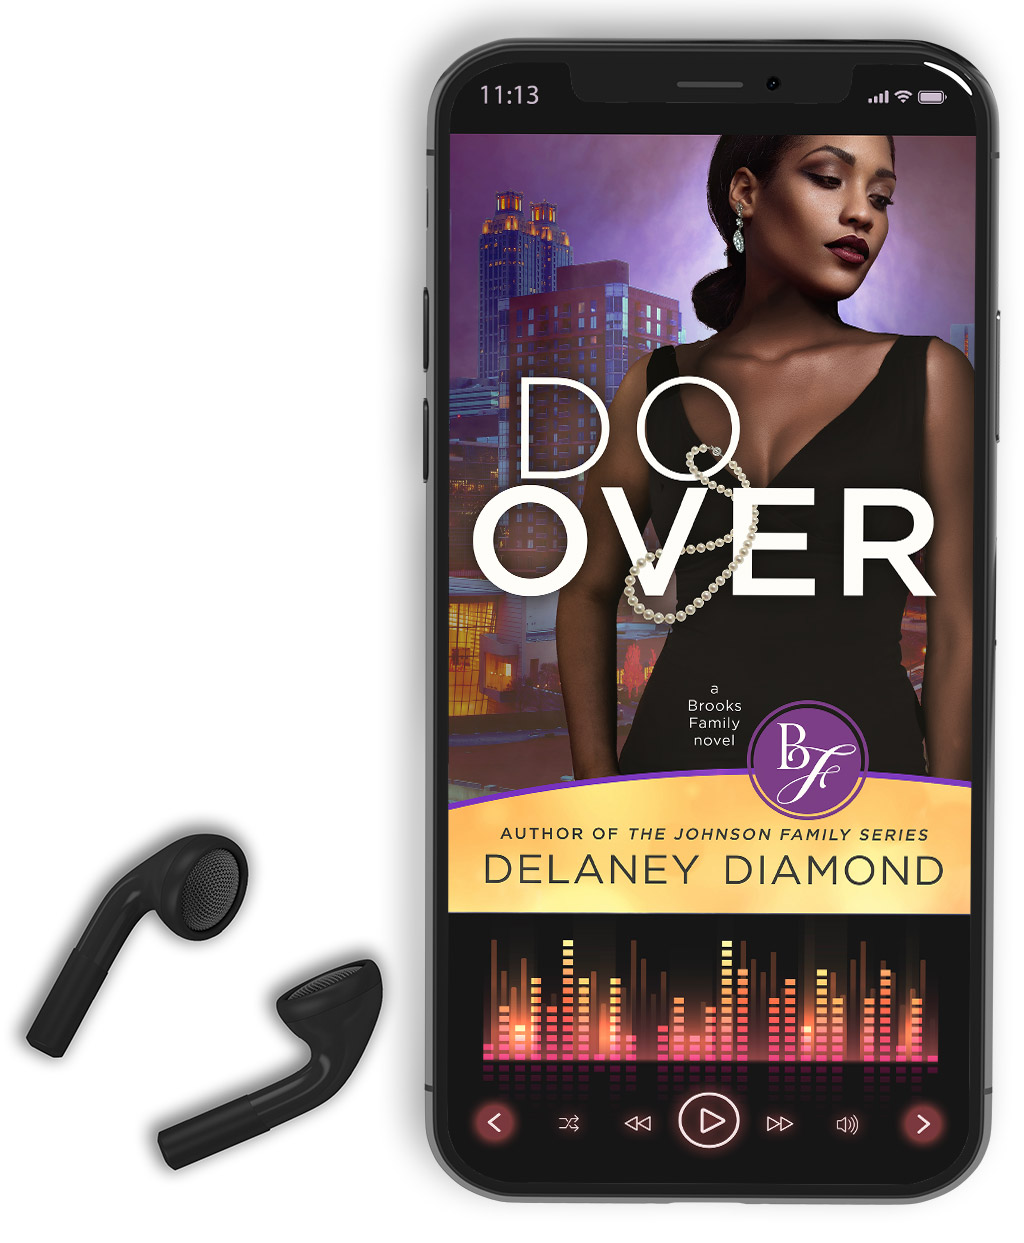 The Do Over - Brooks family series #3 - Audiobook by Delaney Diamond